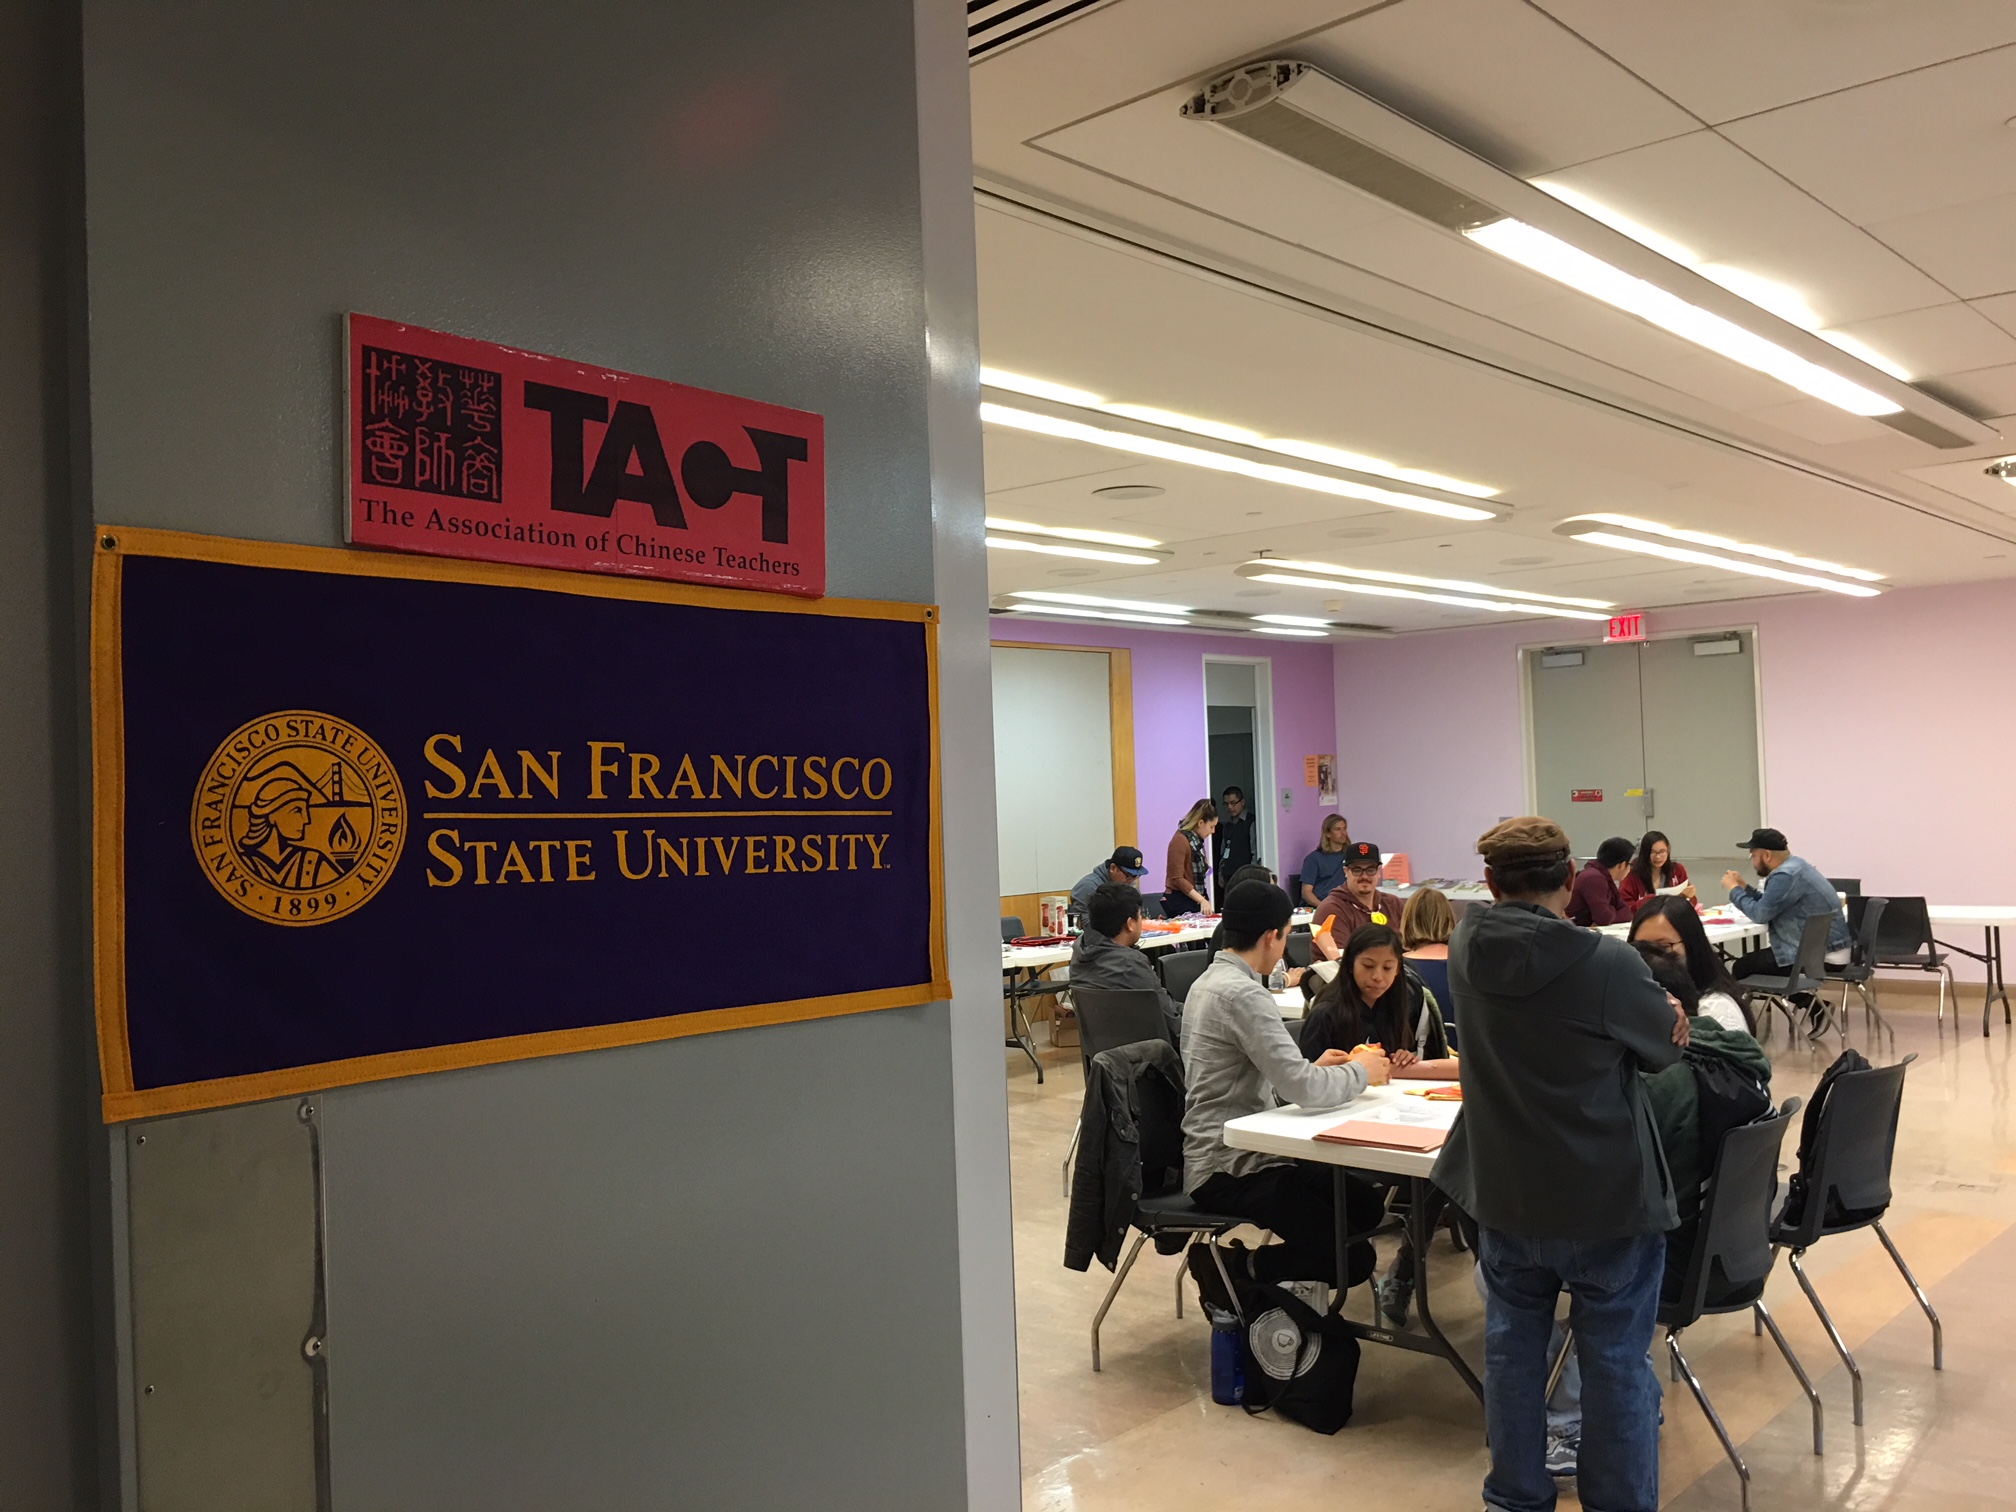 TACT and San Francisco State University Banners